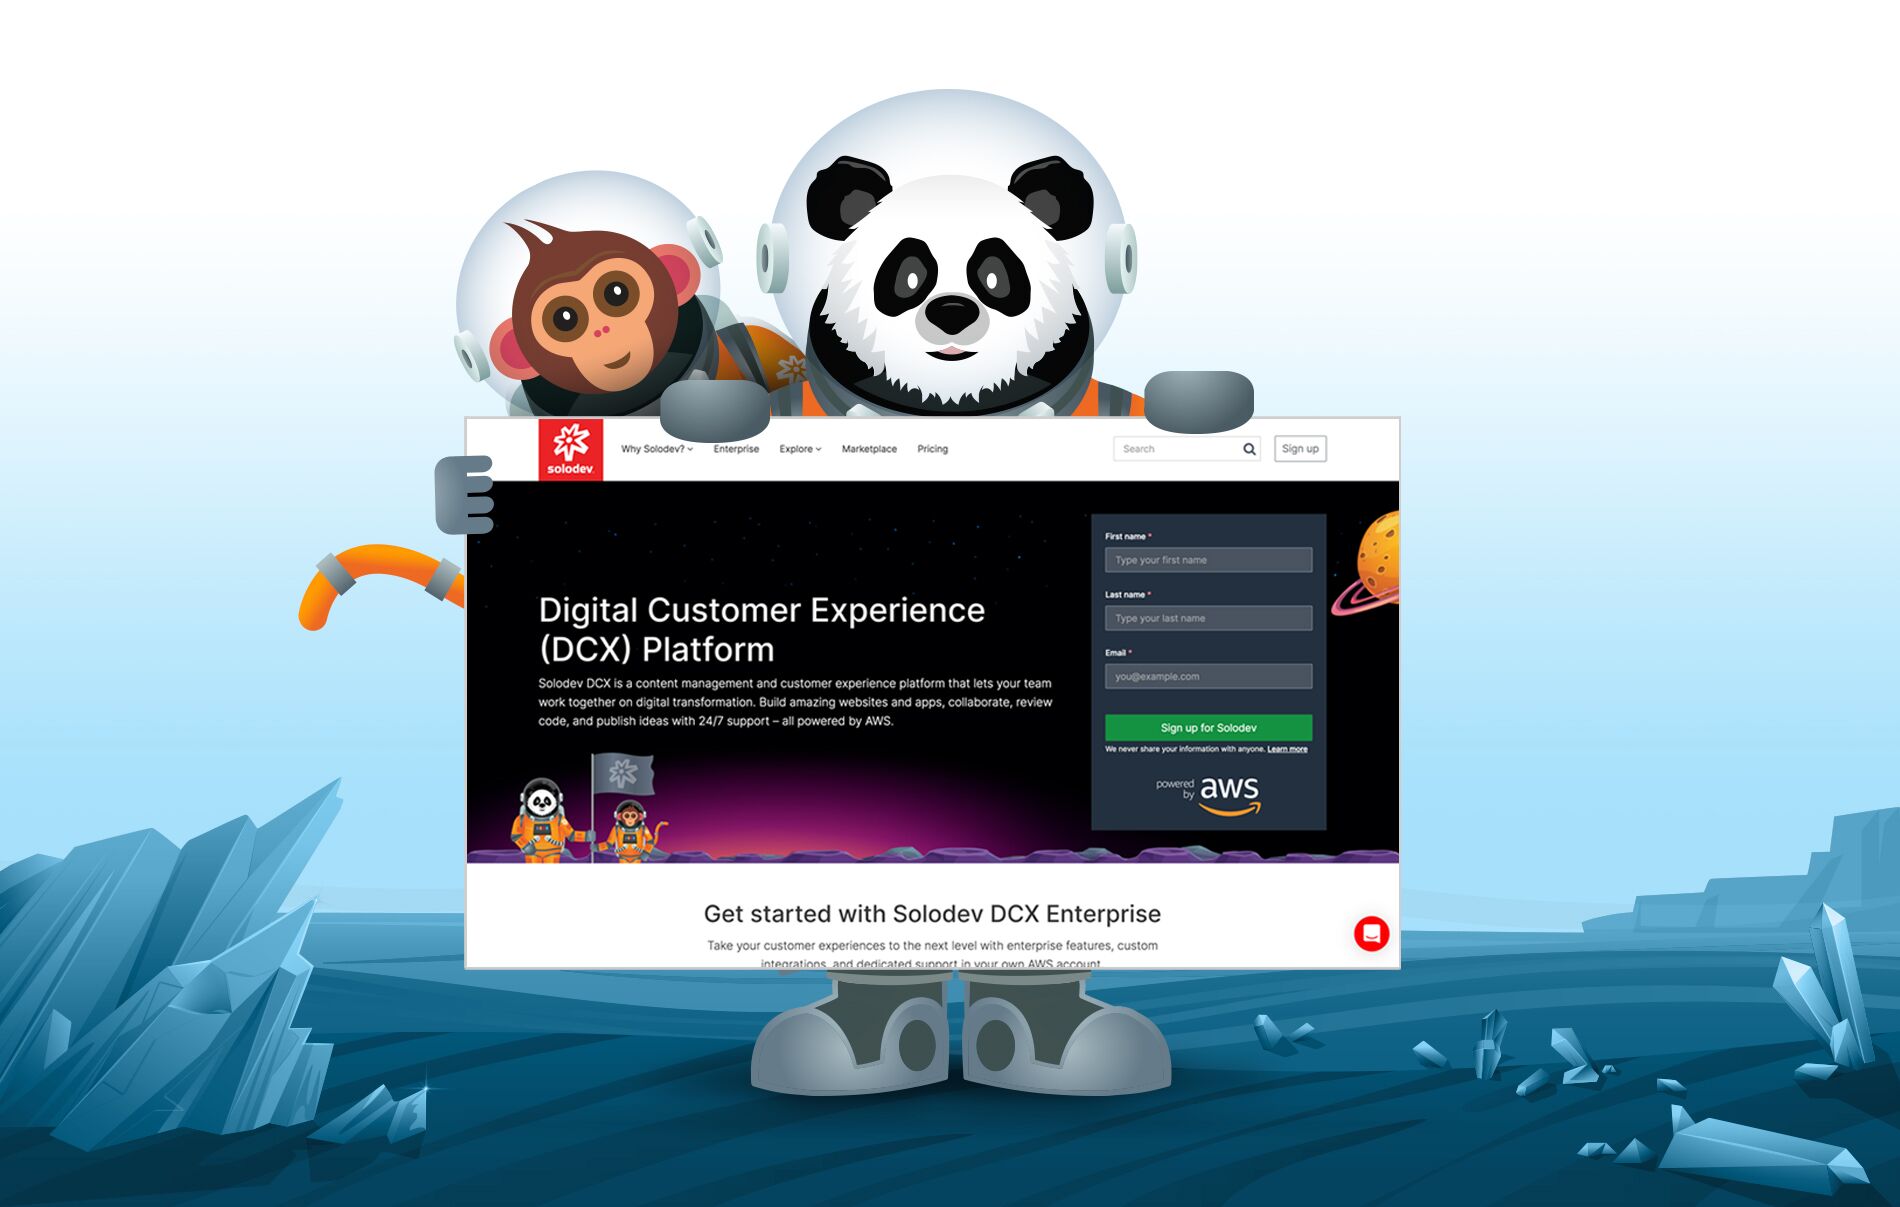 Welcome to the New Solodev Digital Customer Experience (DCX) Platform